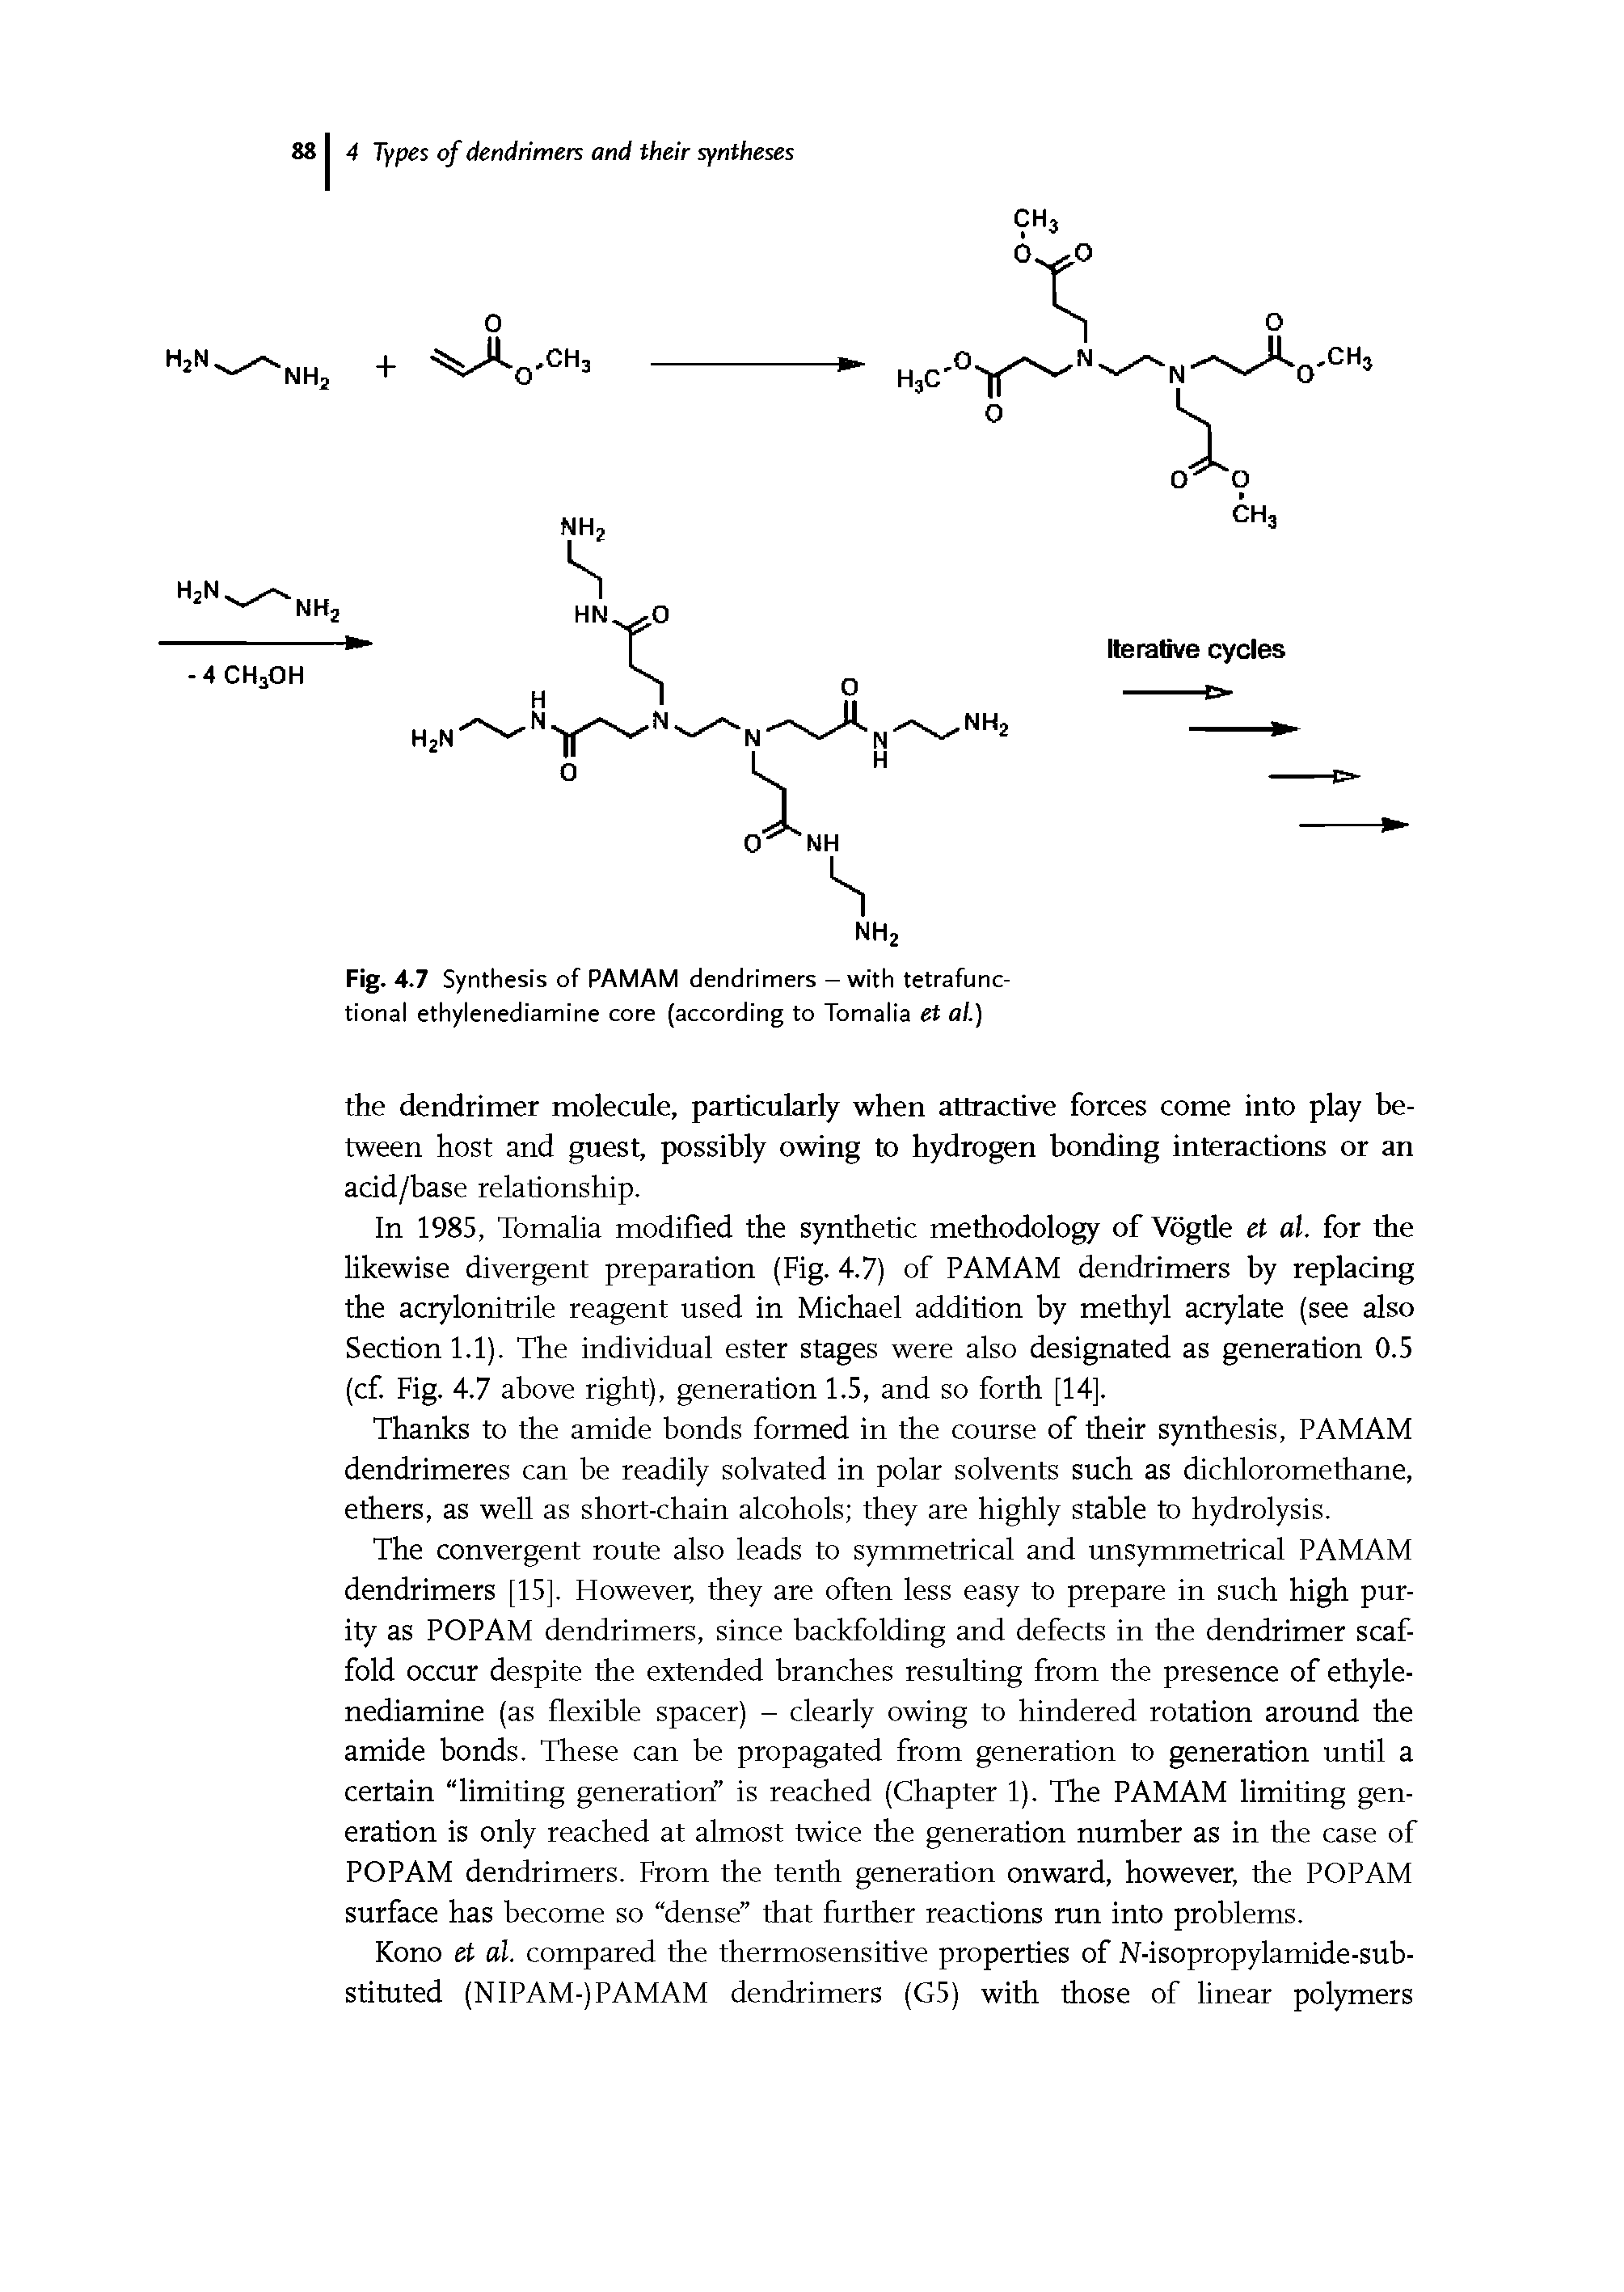 Fig. 4.7 Synthesis of PAMAM dendrimers — with tetrafunc-tional ethylenediamine core (according to Tomalia et al.)...